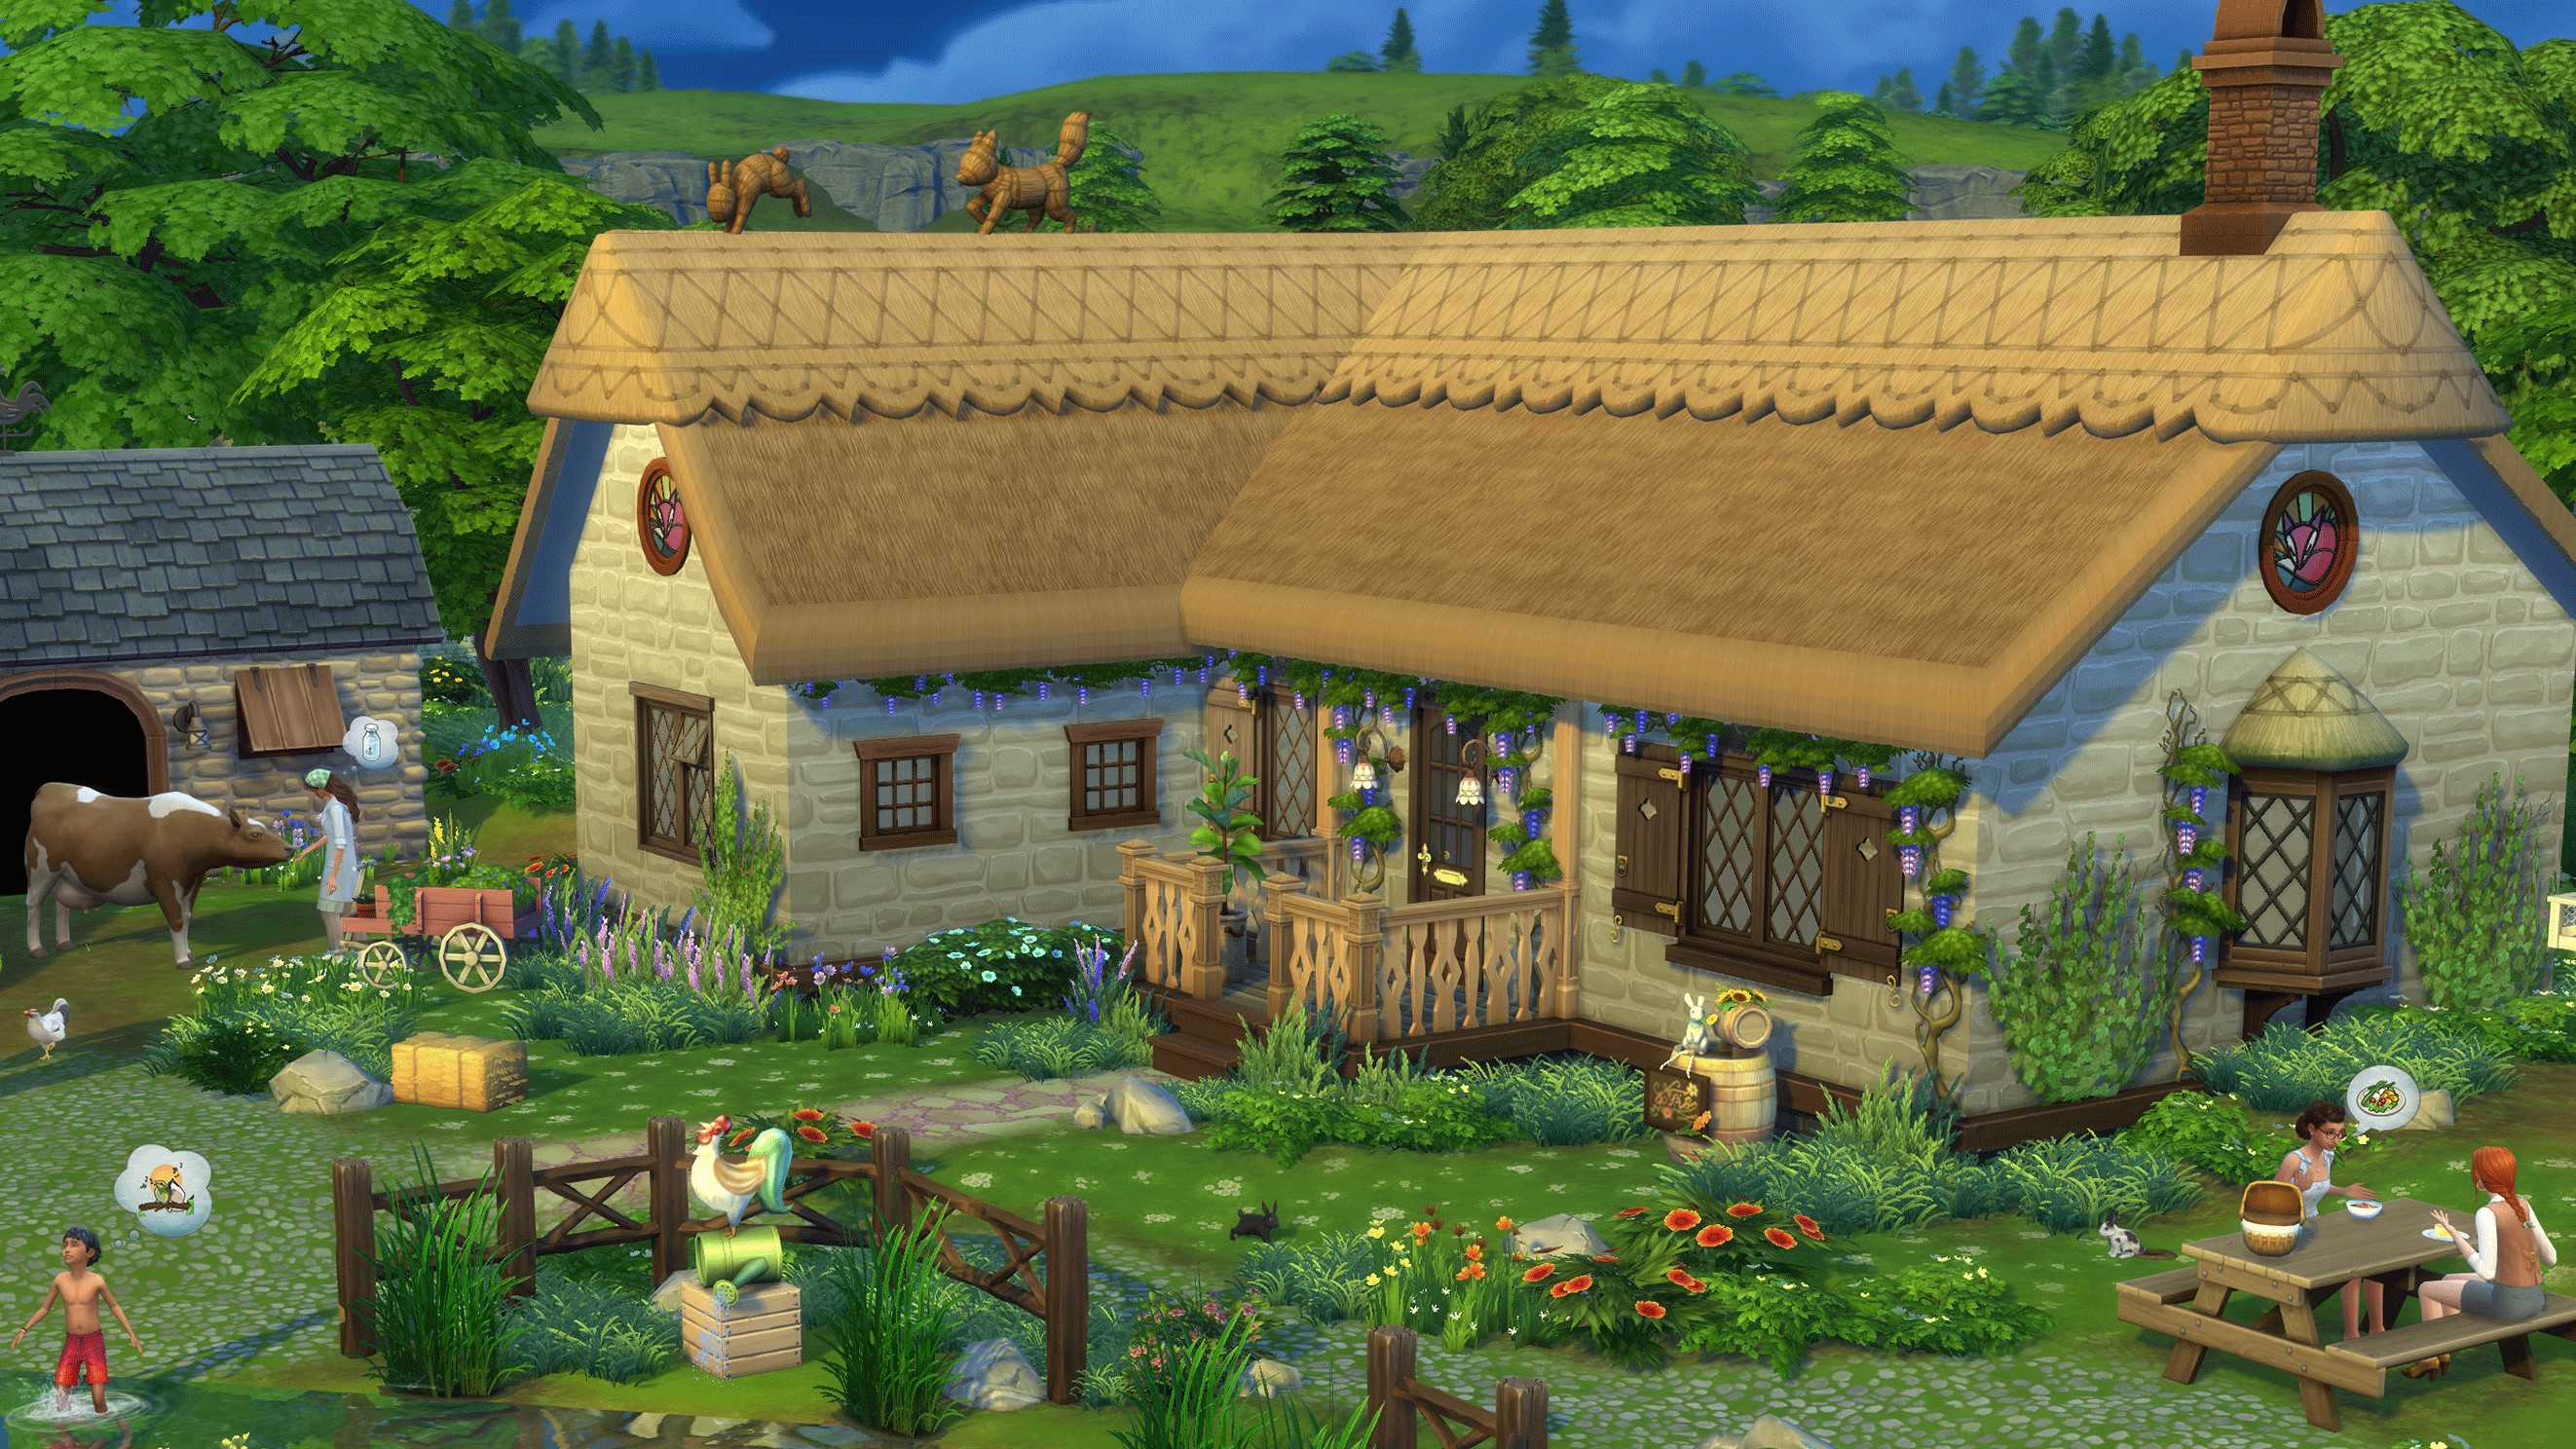 The Sims 4: Cottage Living Left Me Wishing For Death's Sweet Kiss |  Tech Radar